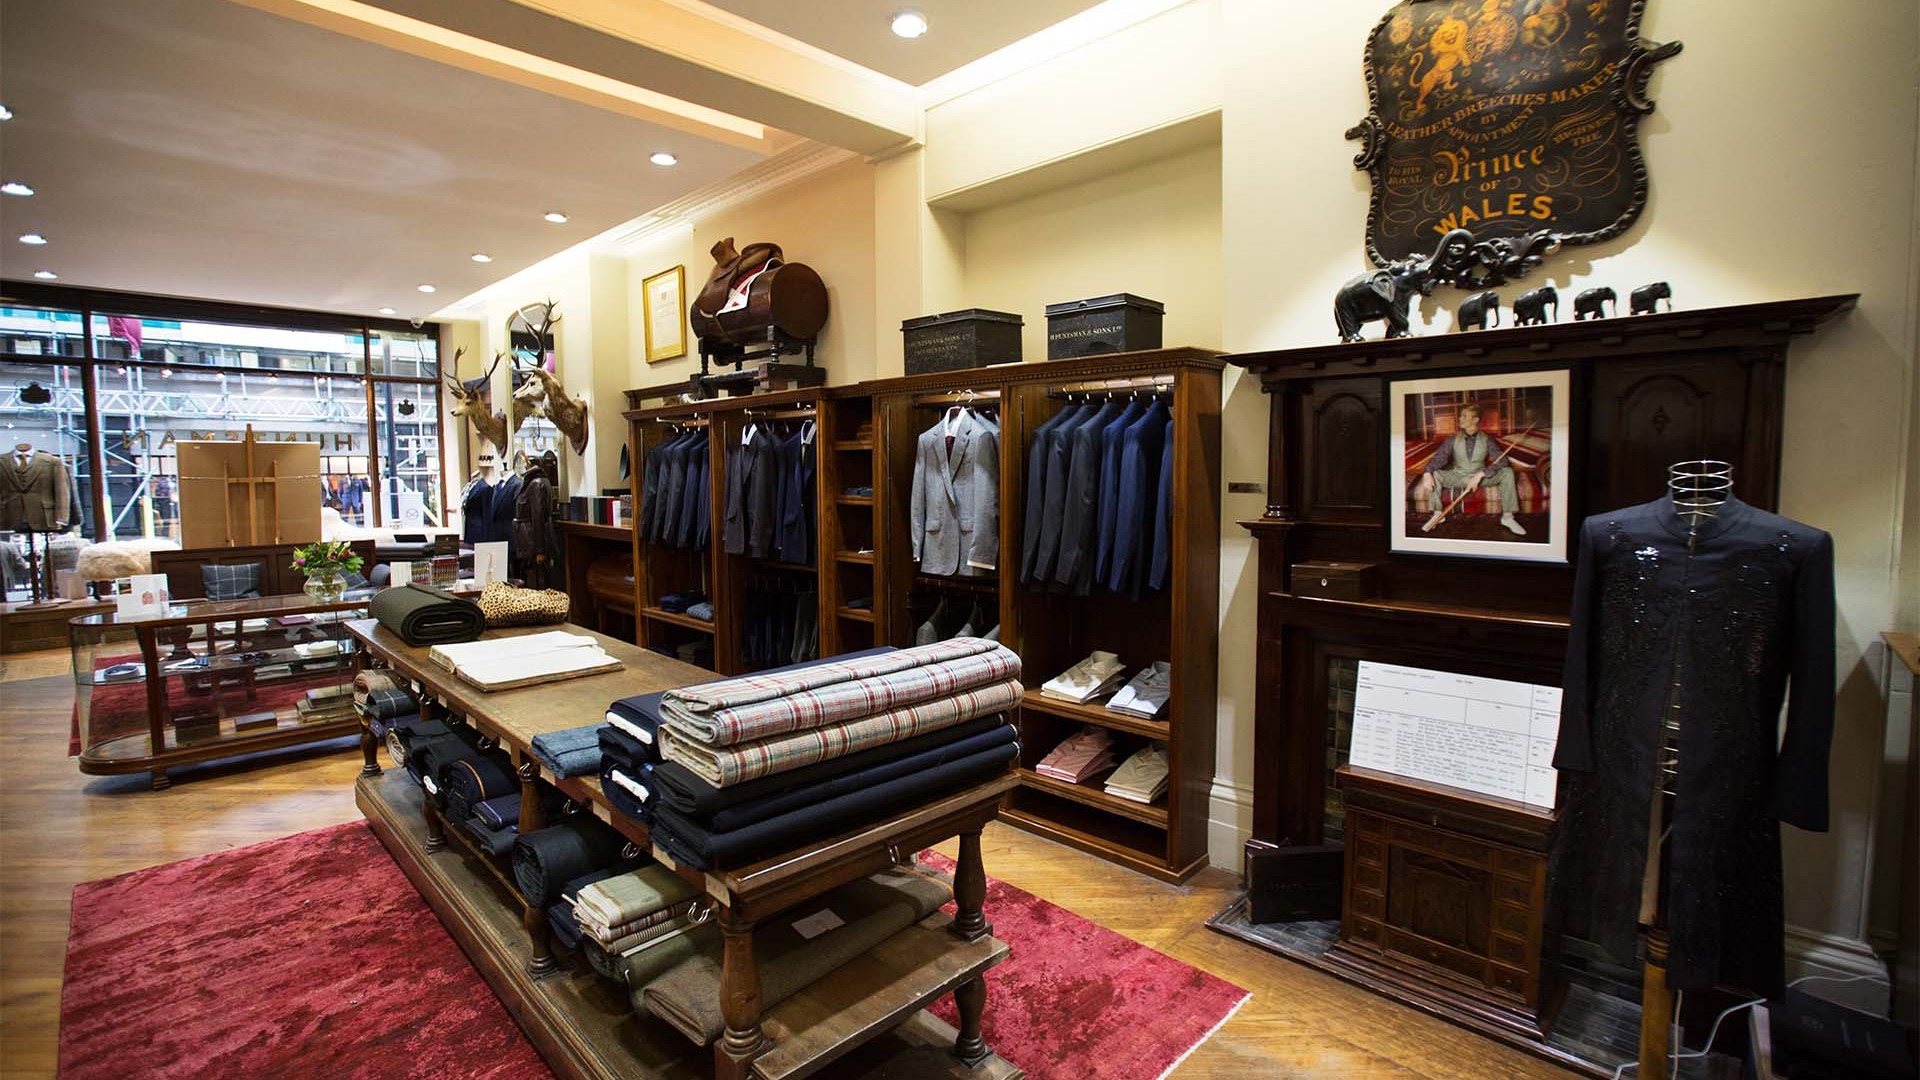 Go behind the scenes of the world's most expensive tailor | Square Mile